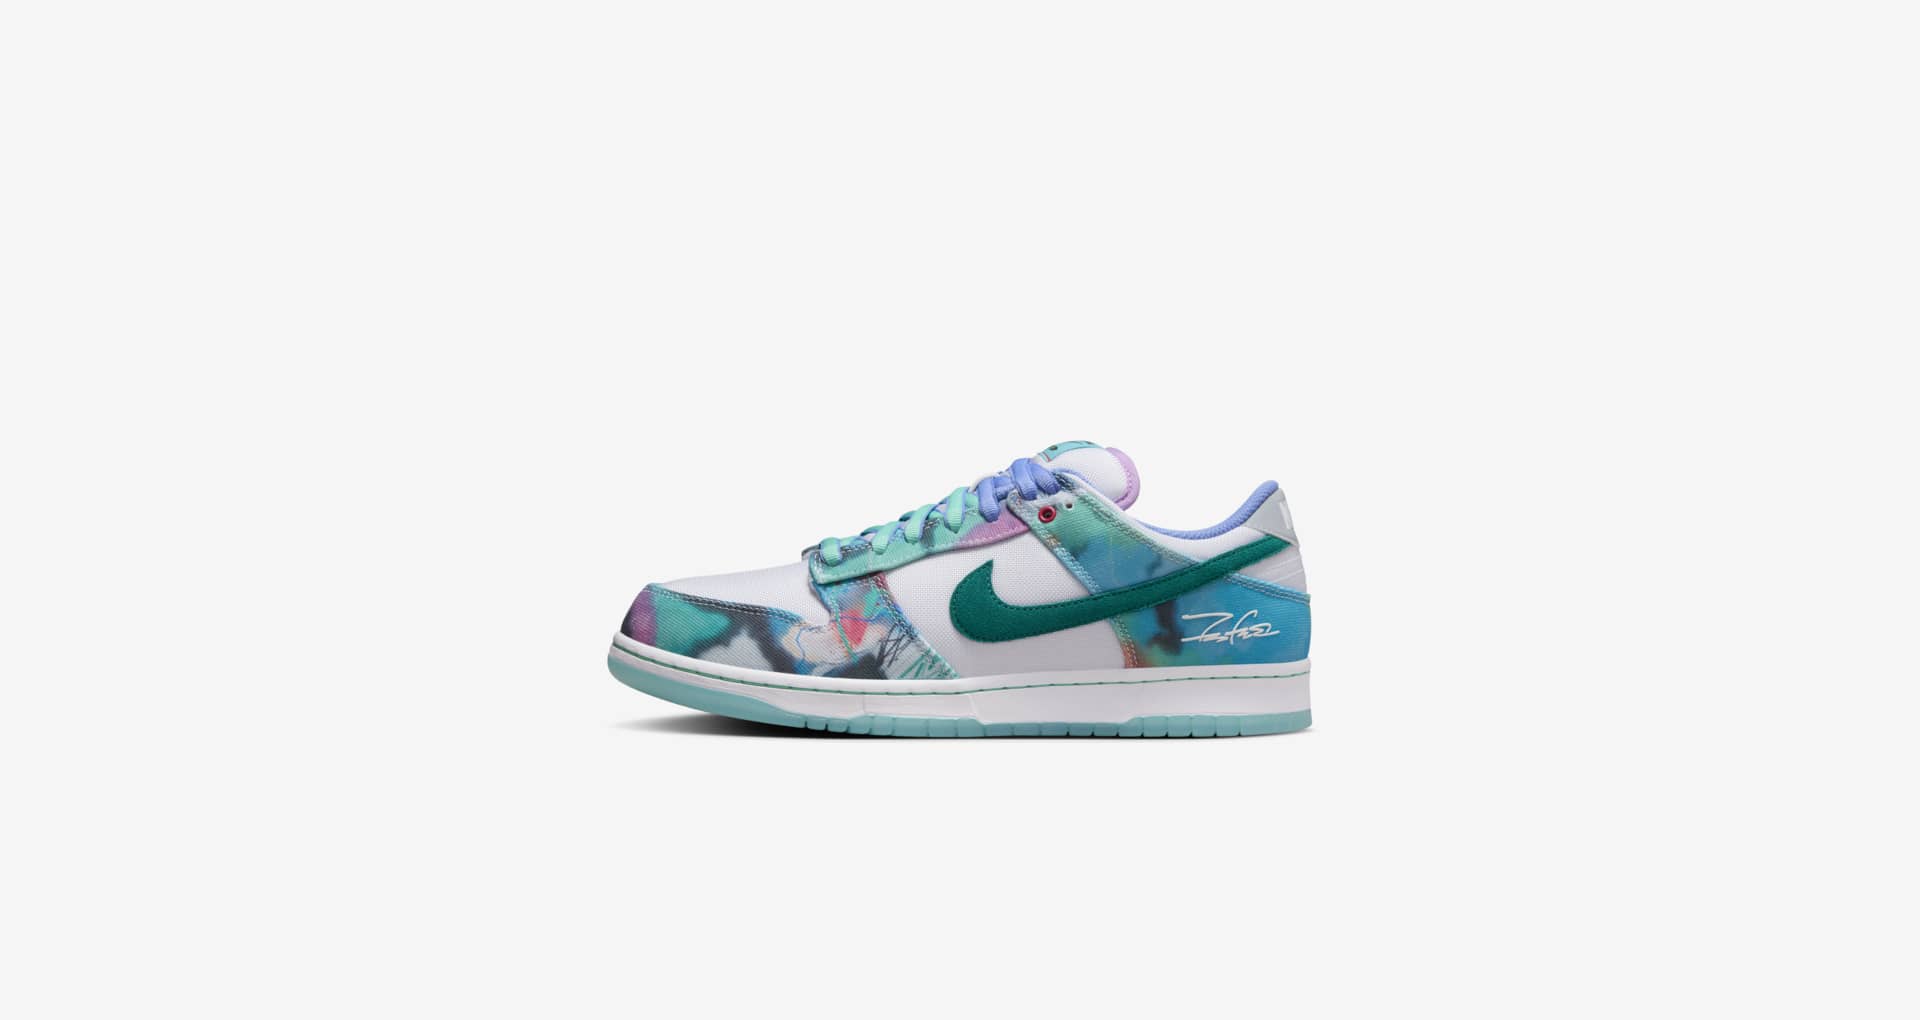 Nike SB Dunk Low x Futura Laboratories 'White and Geode Teal' (HF6061-400)  Release Date. Nike SNKRS US